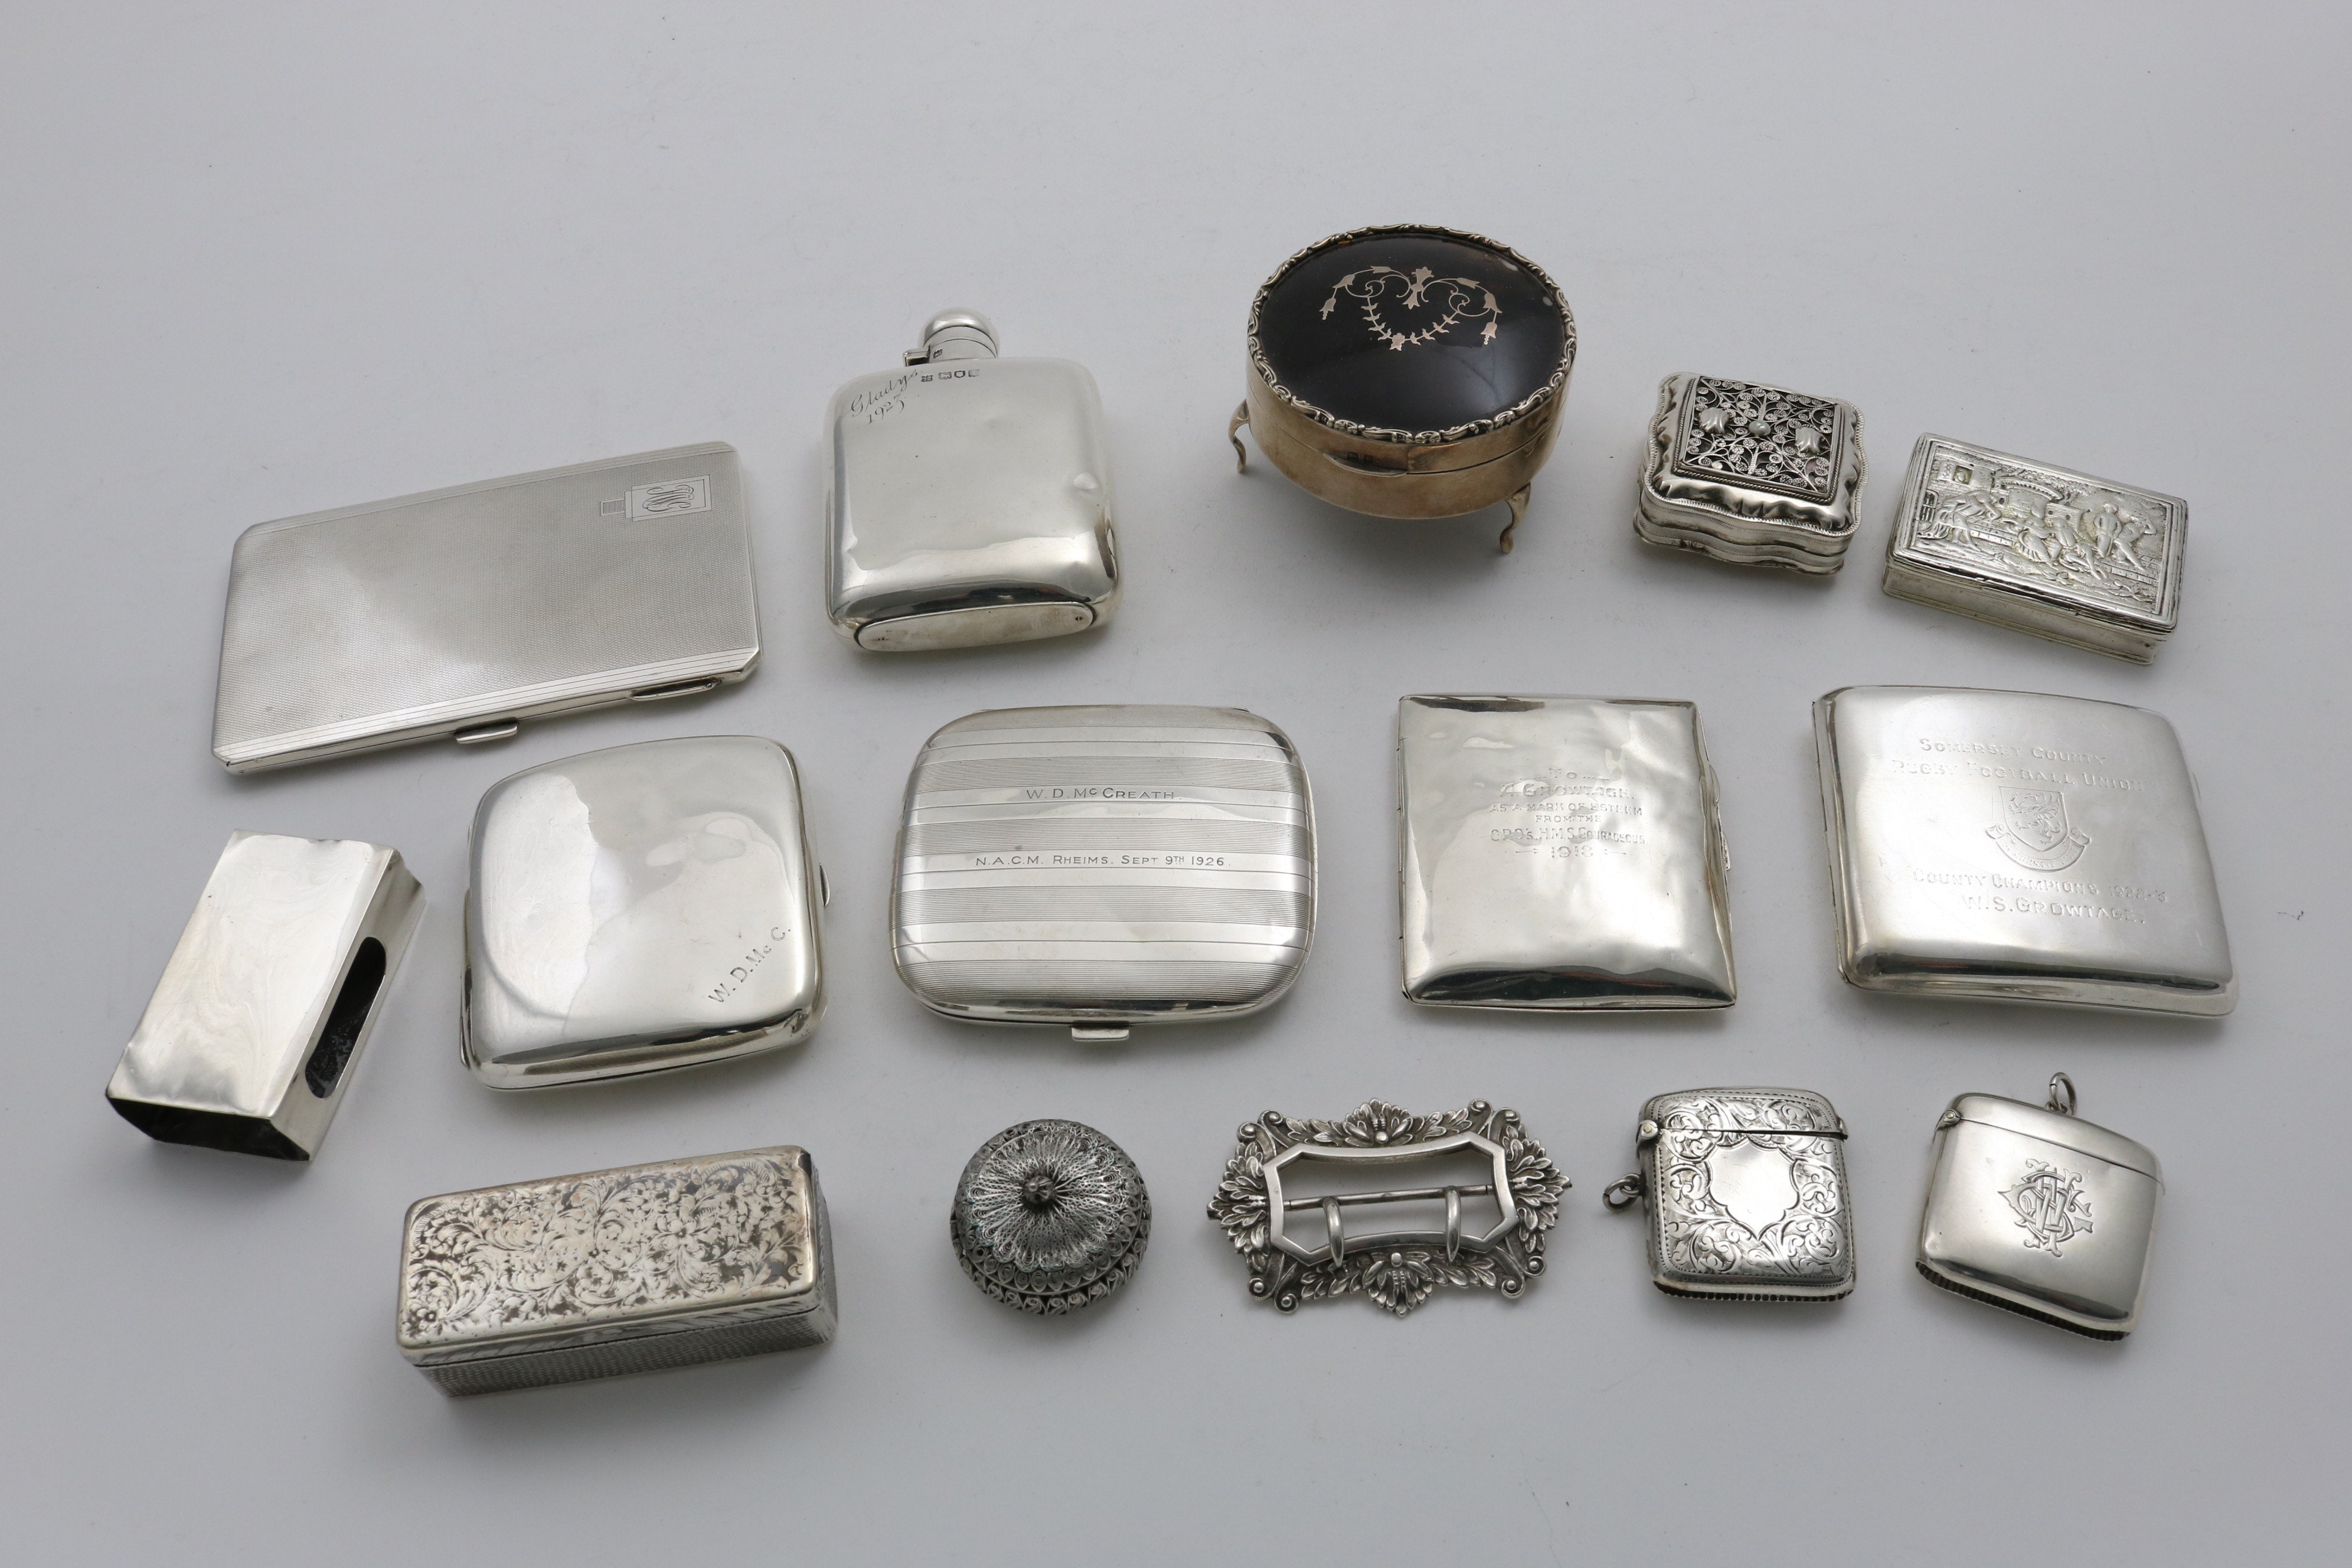 A MIXED LOT:- Five various cigarette cases, each with an inscription/dedication, a spirit flask